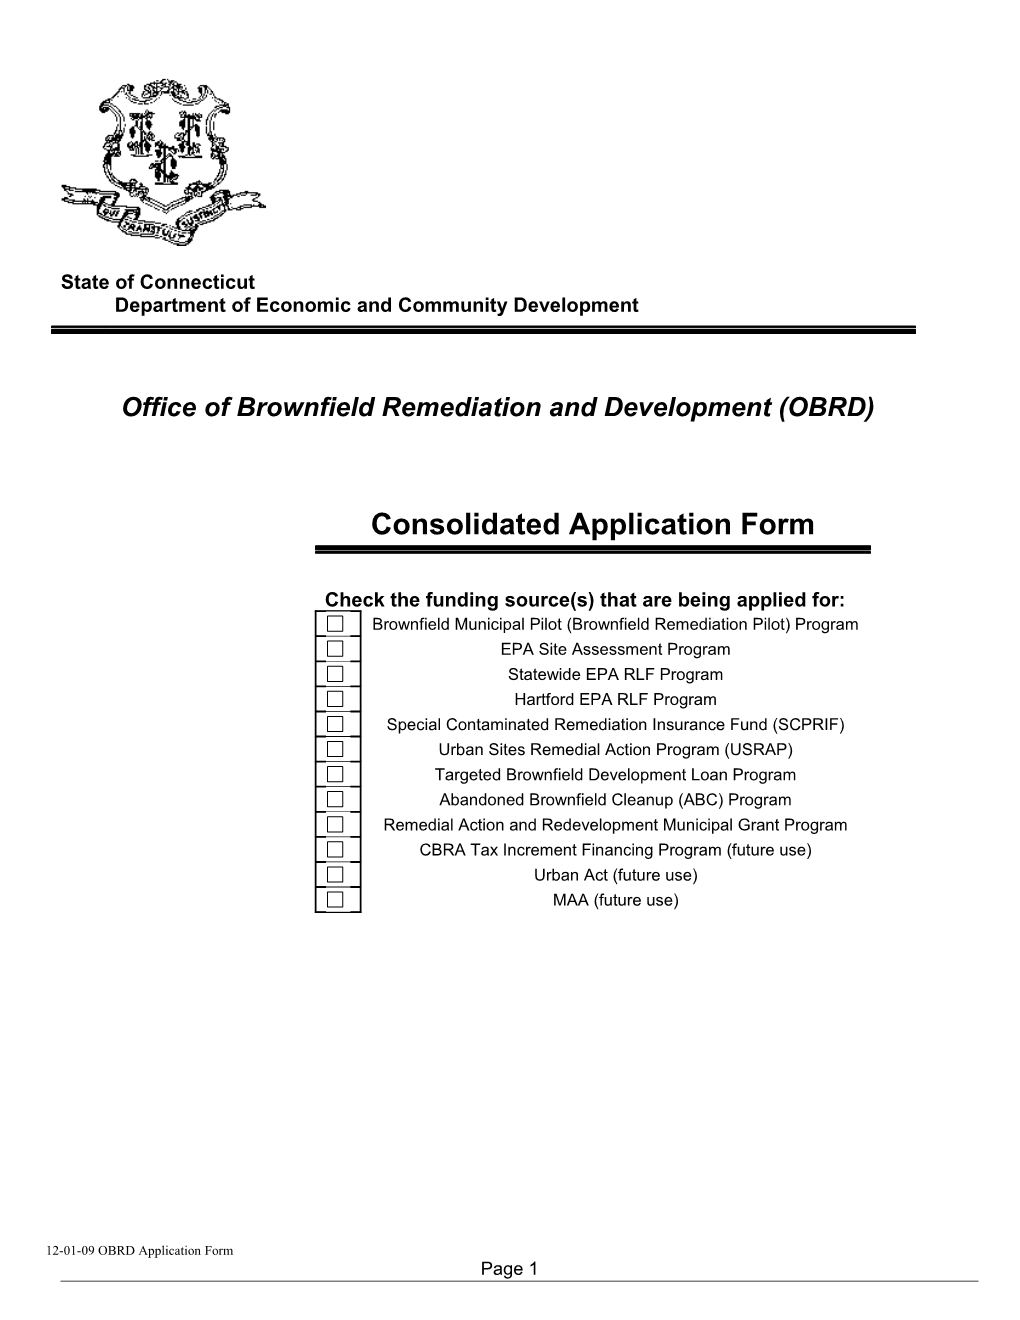 Office of Brownfield Remediation and Development (OBRD) s1